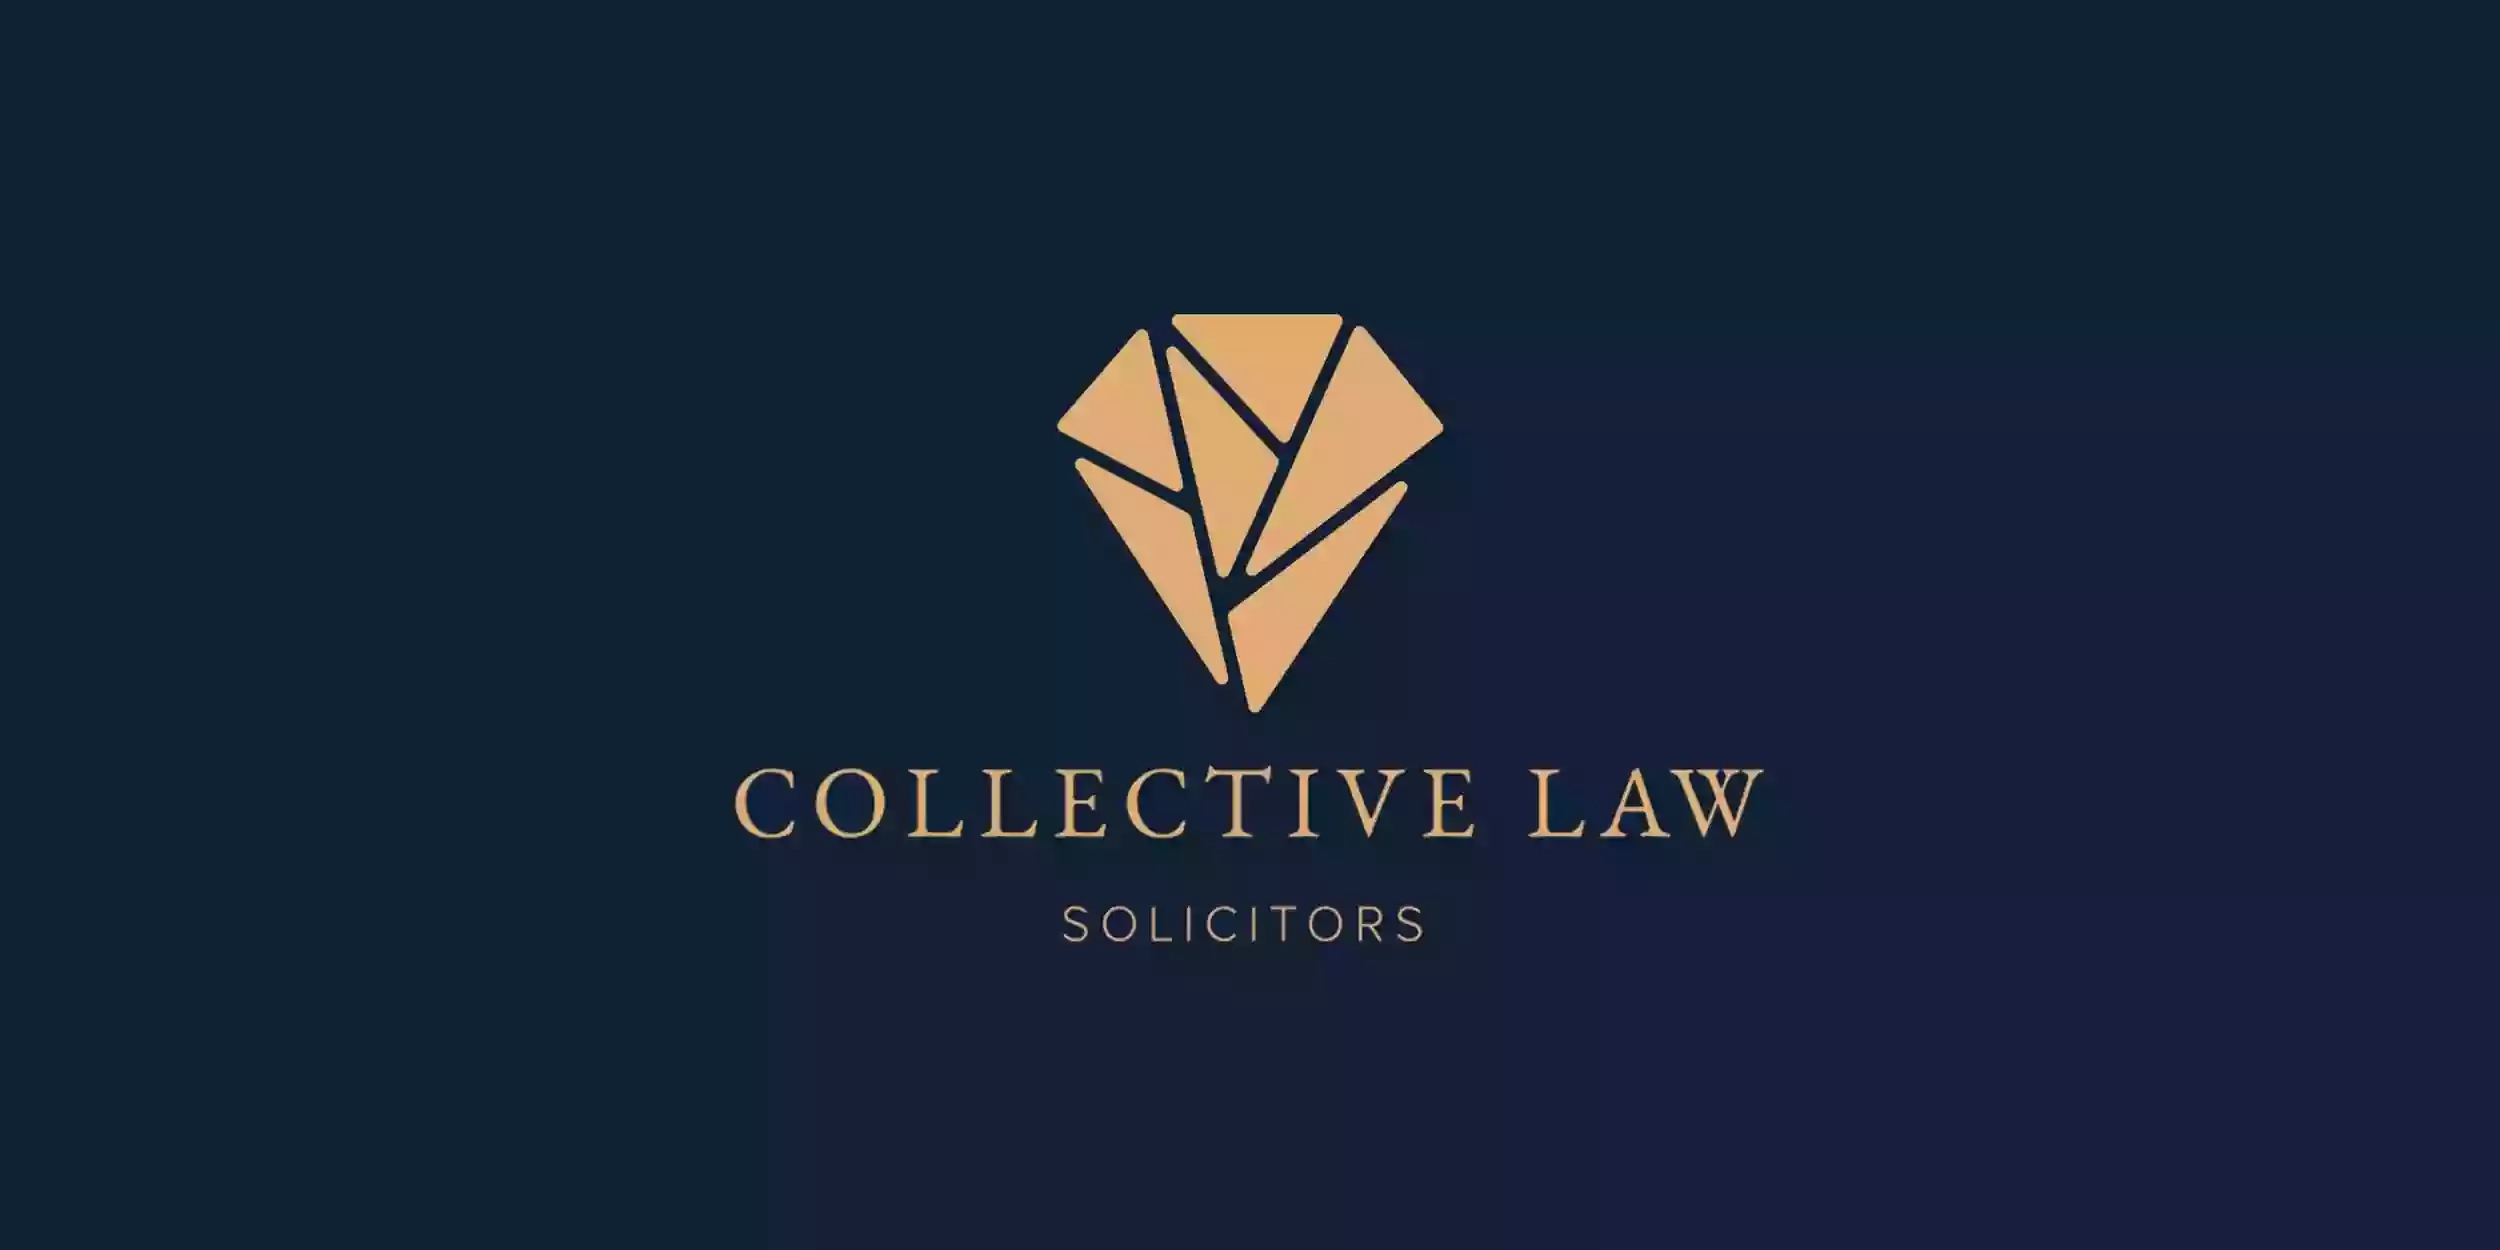 Collective Law Solicitors Ltd